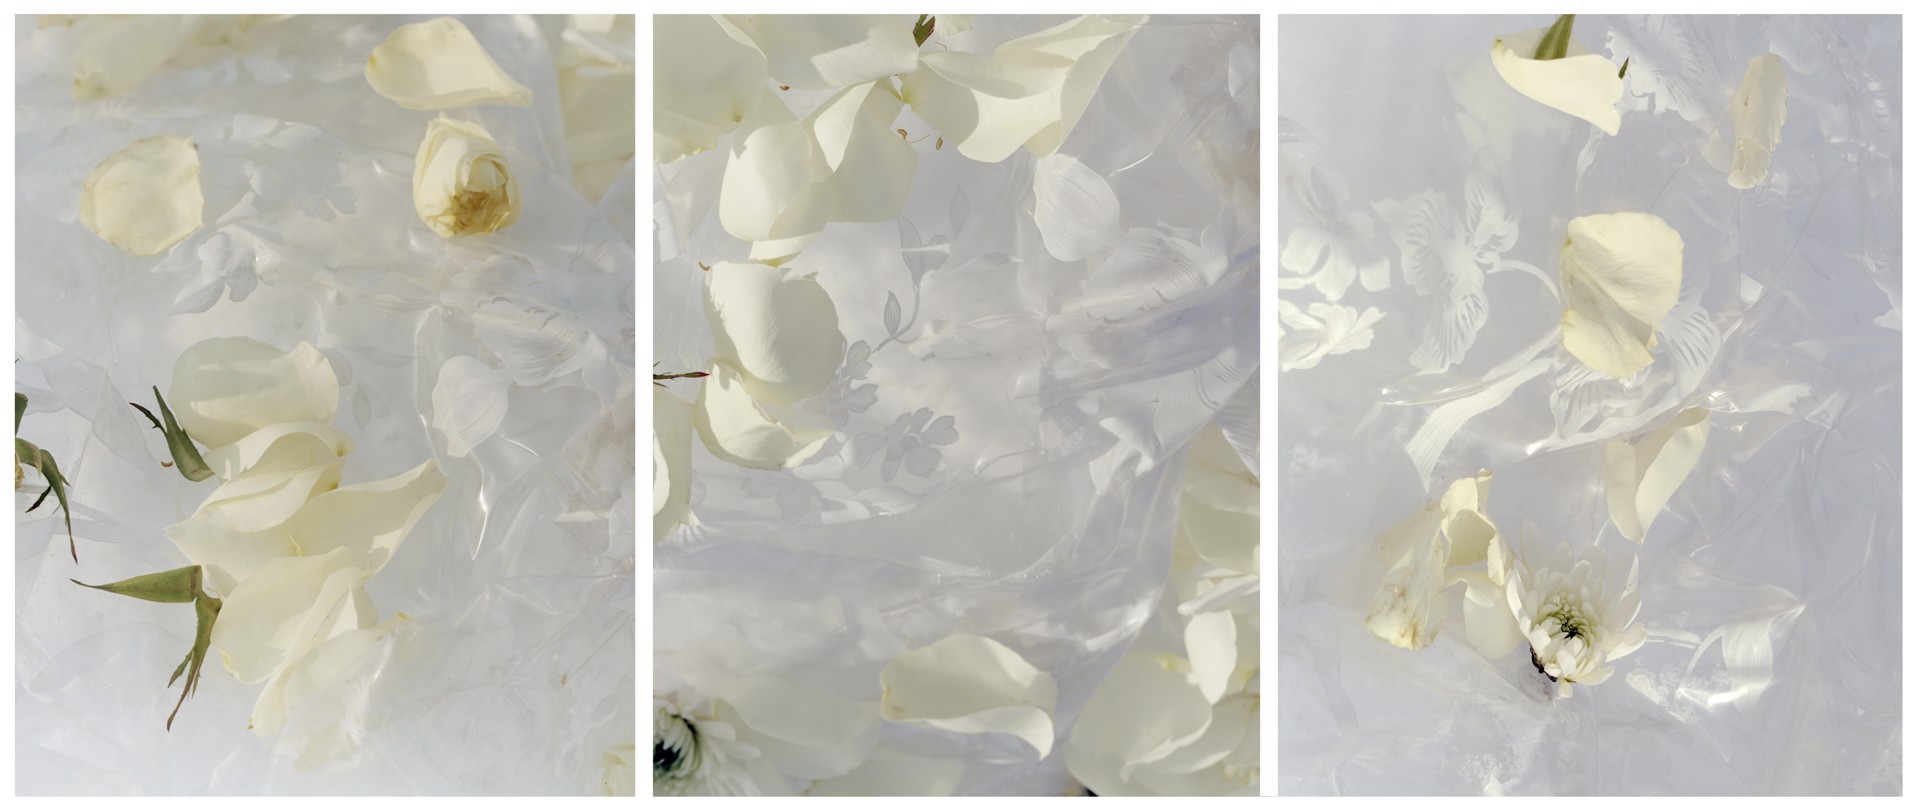 Untitled (White Rose) by Laura McPhee